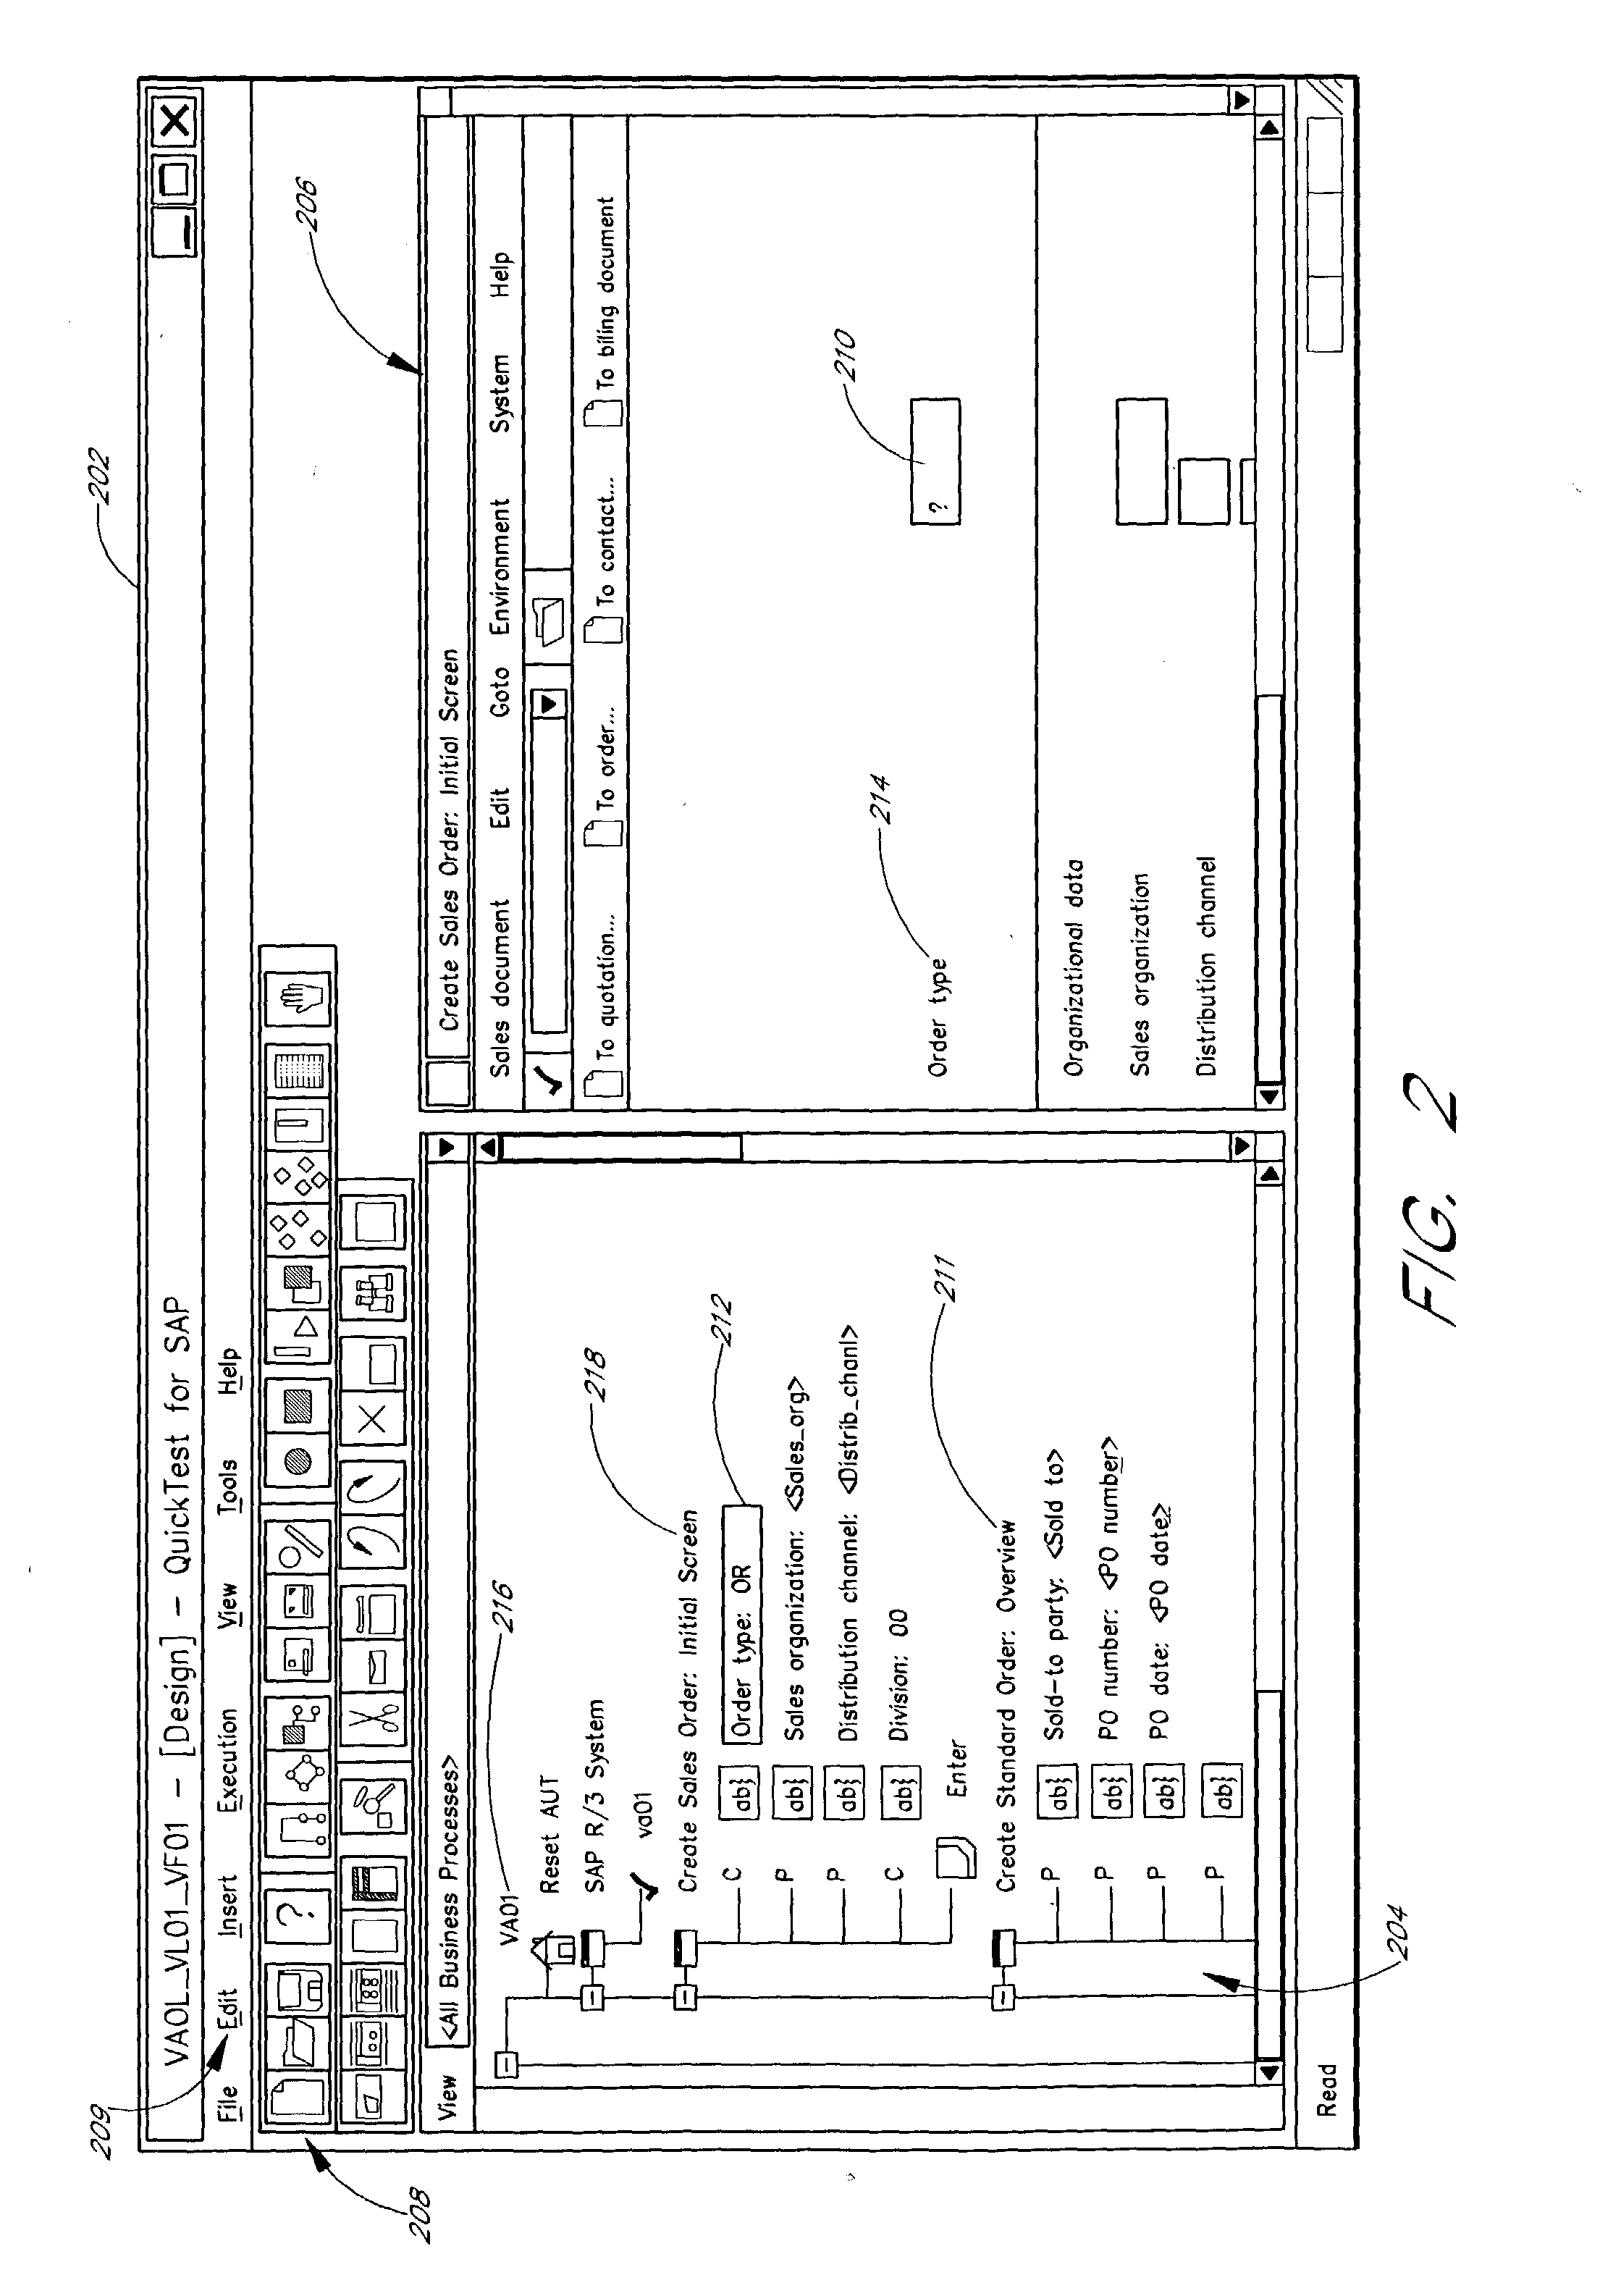 Software system and methods for testing transactional servers